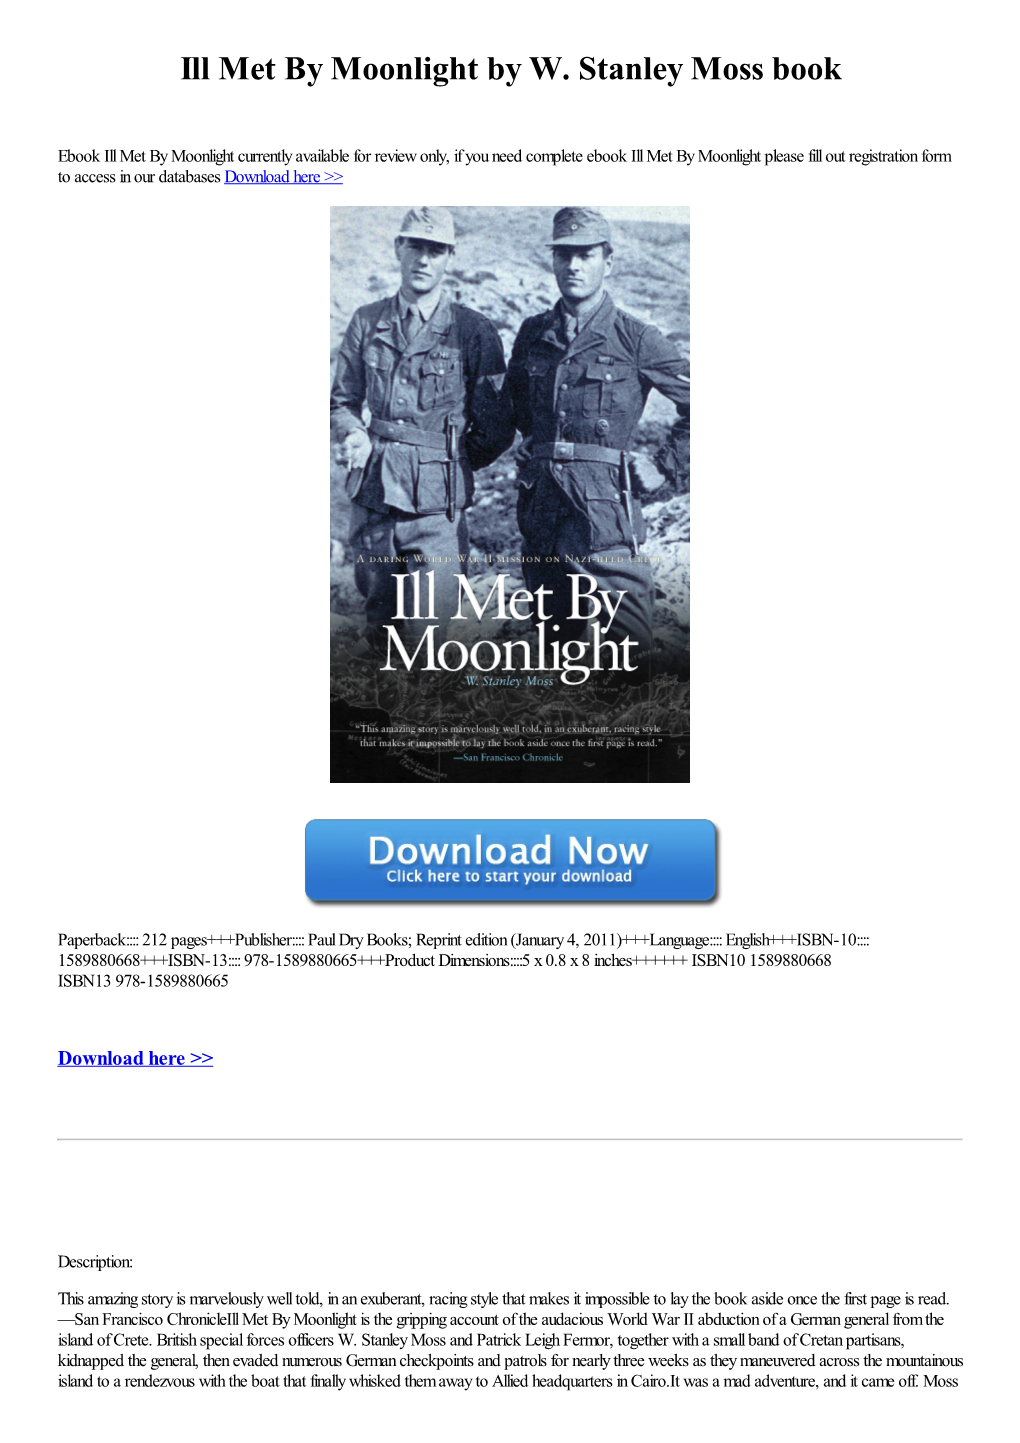 Ill Met by Moonlight by W. Stanley Moss [Book]